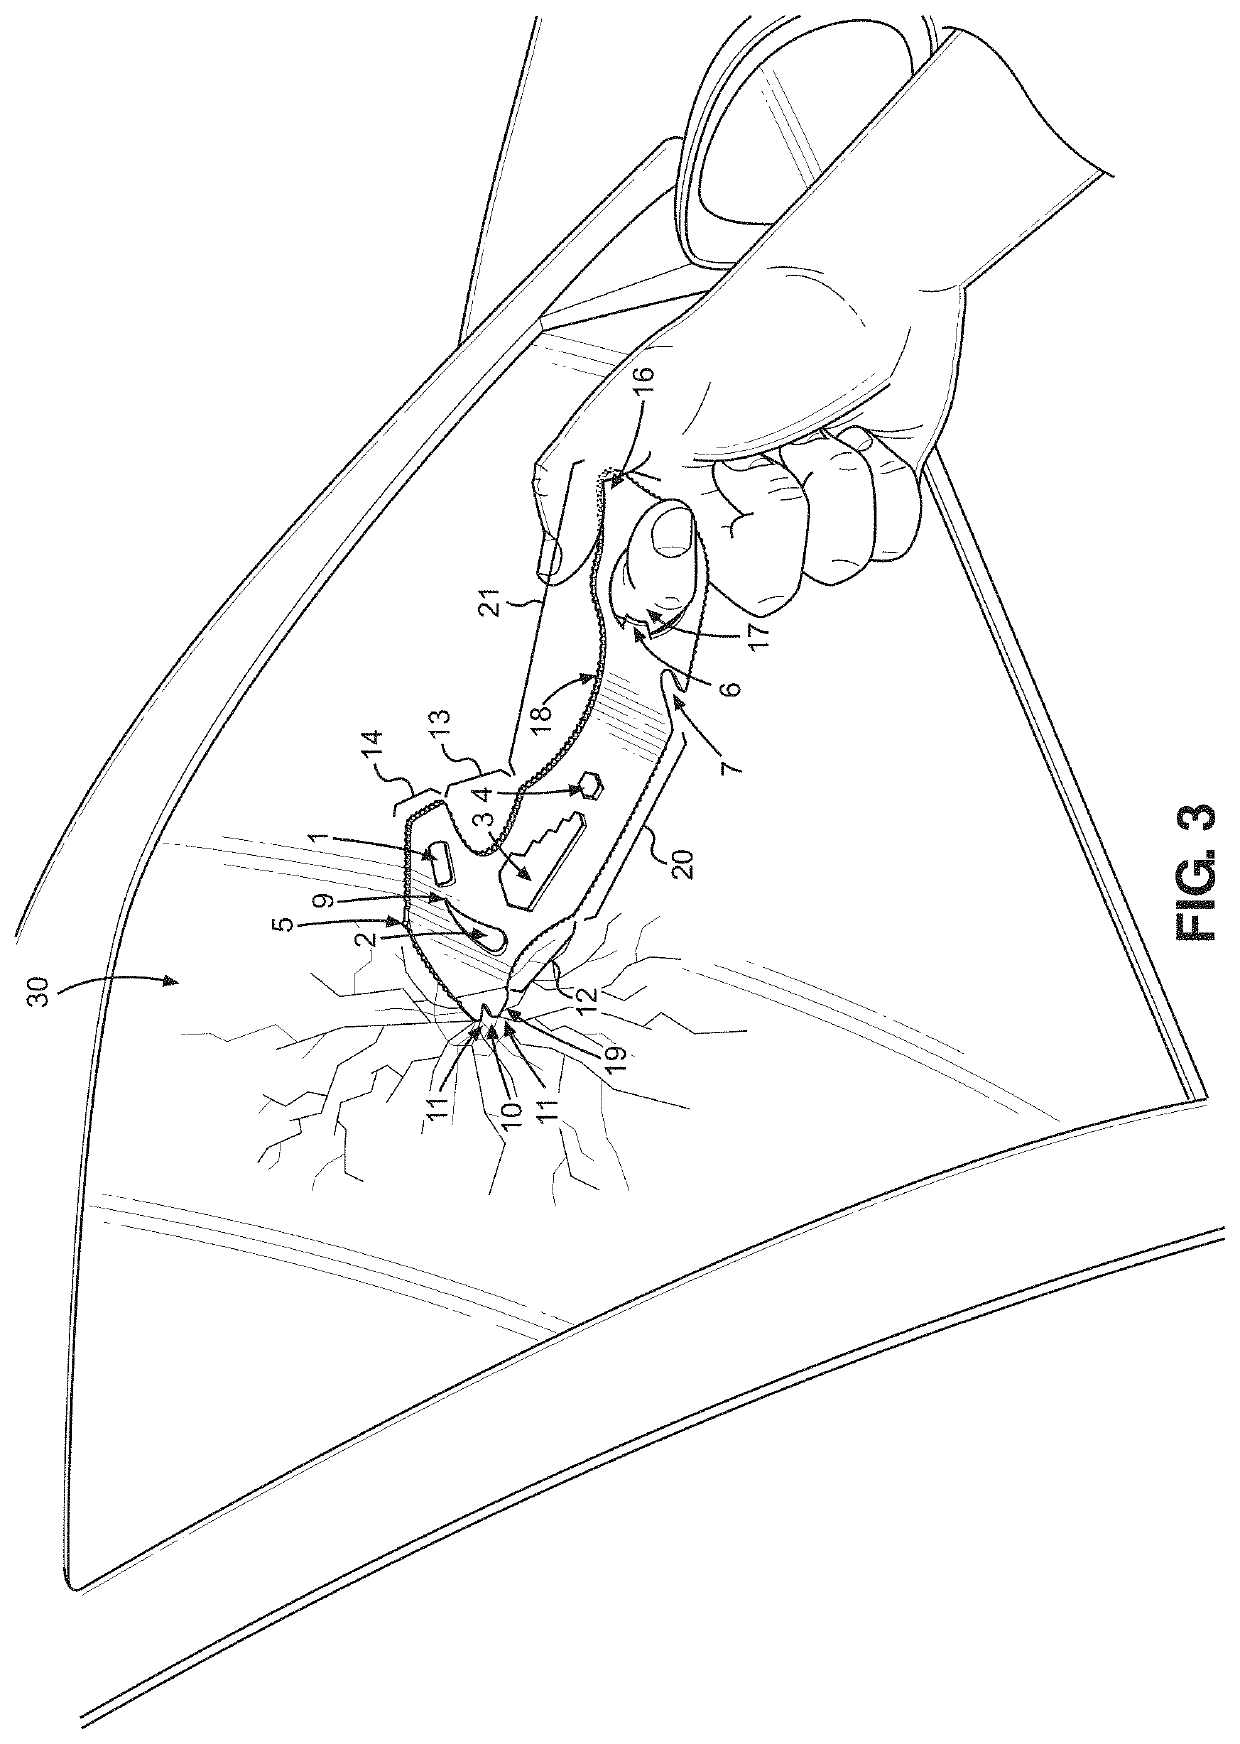 Multi function hand tool in a unitary device